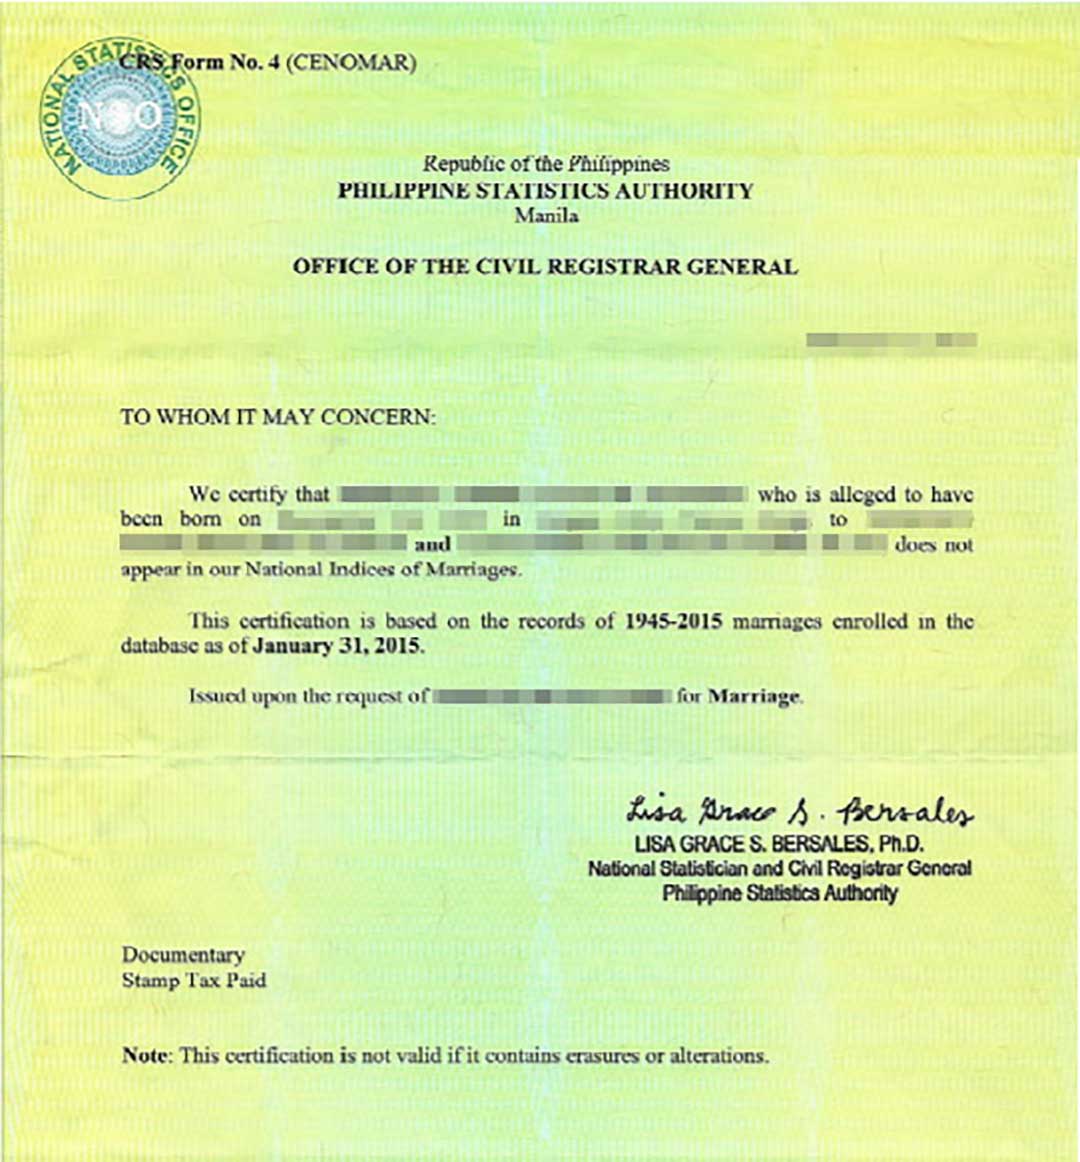 An image of a Philippine Certificate of No Marriage (CENOMAR) which confirms your civil status. You can apply for one to determine your actual recorded marital status.